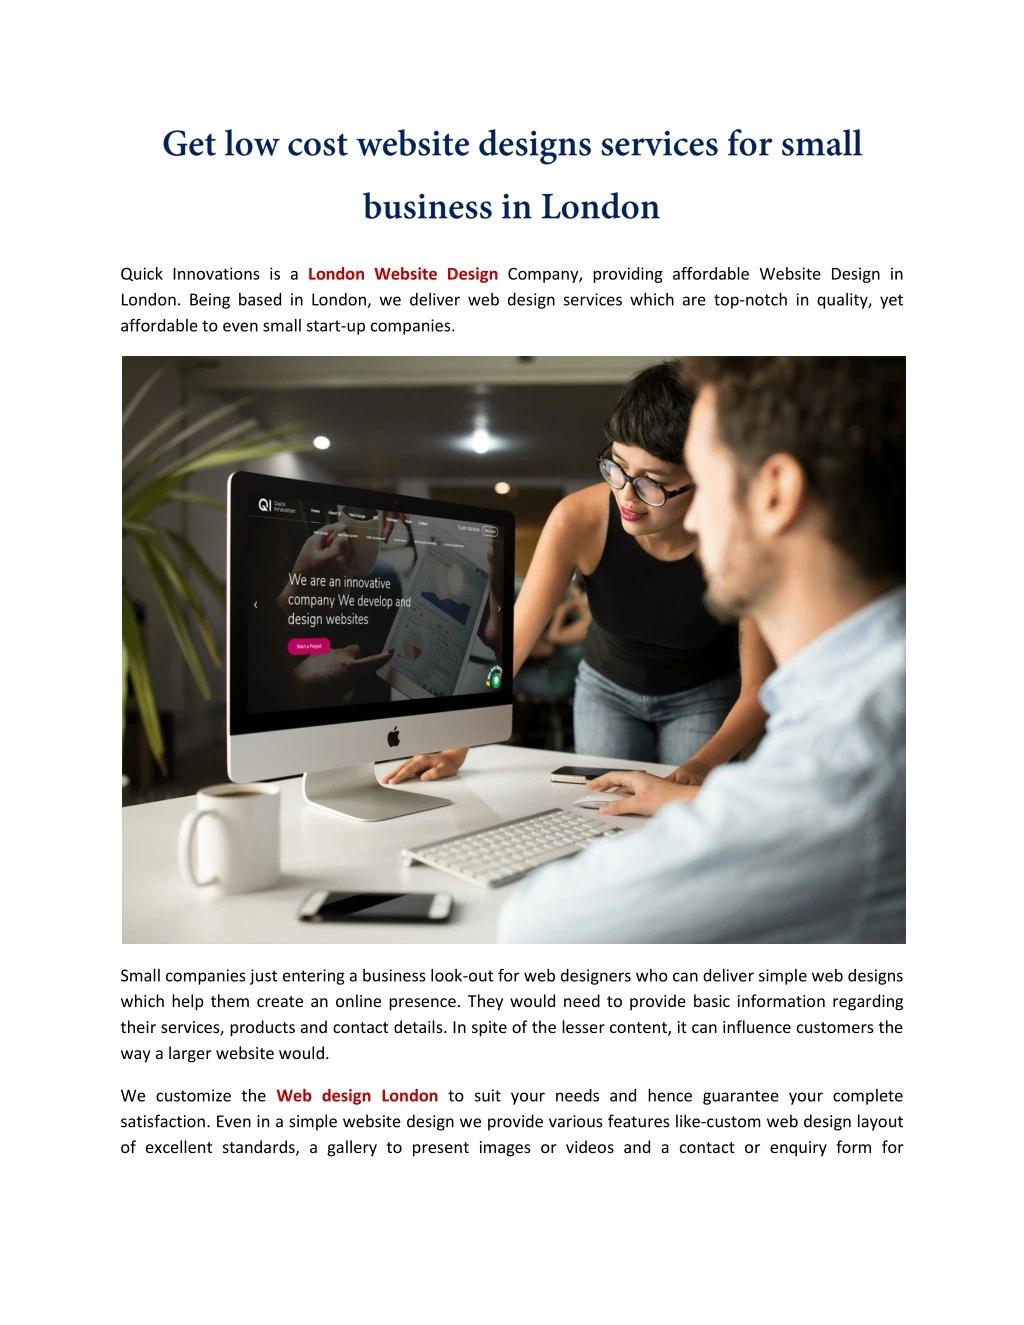 quick innovations is a london website design